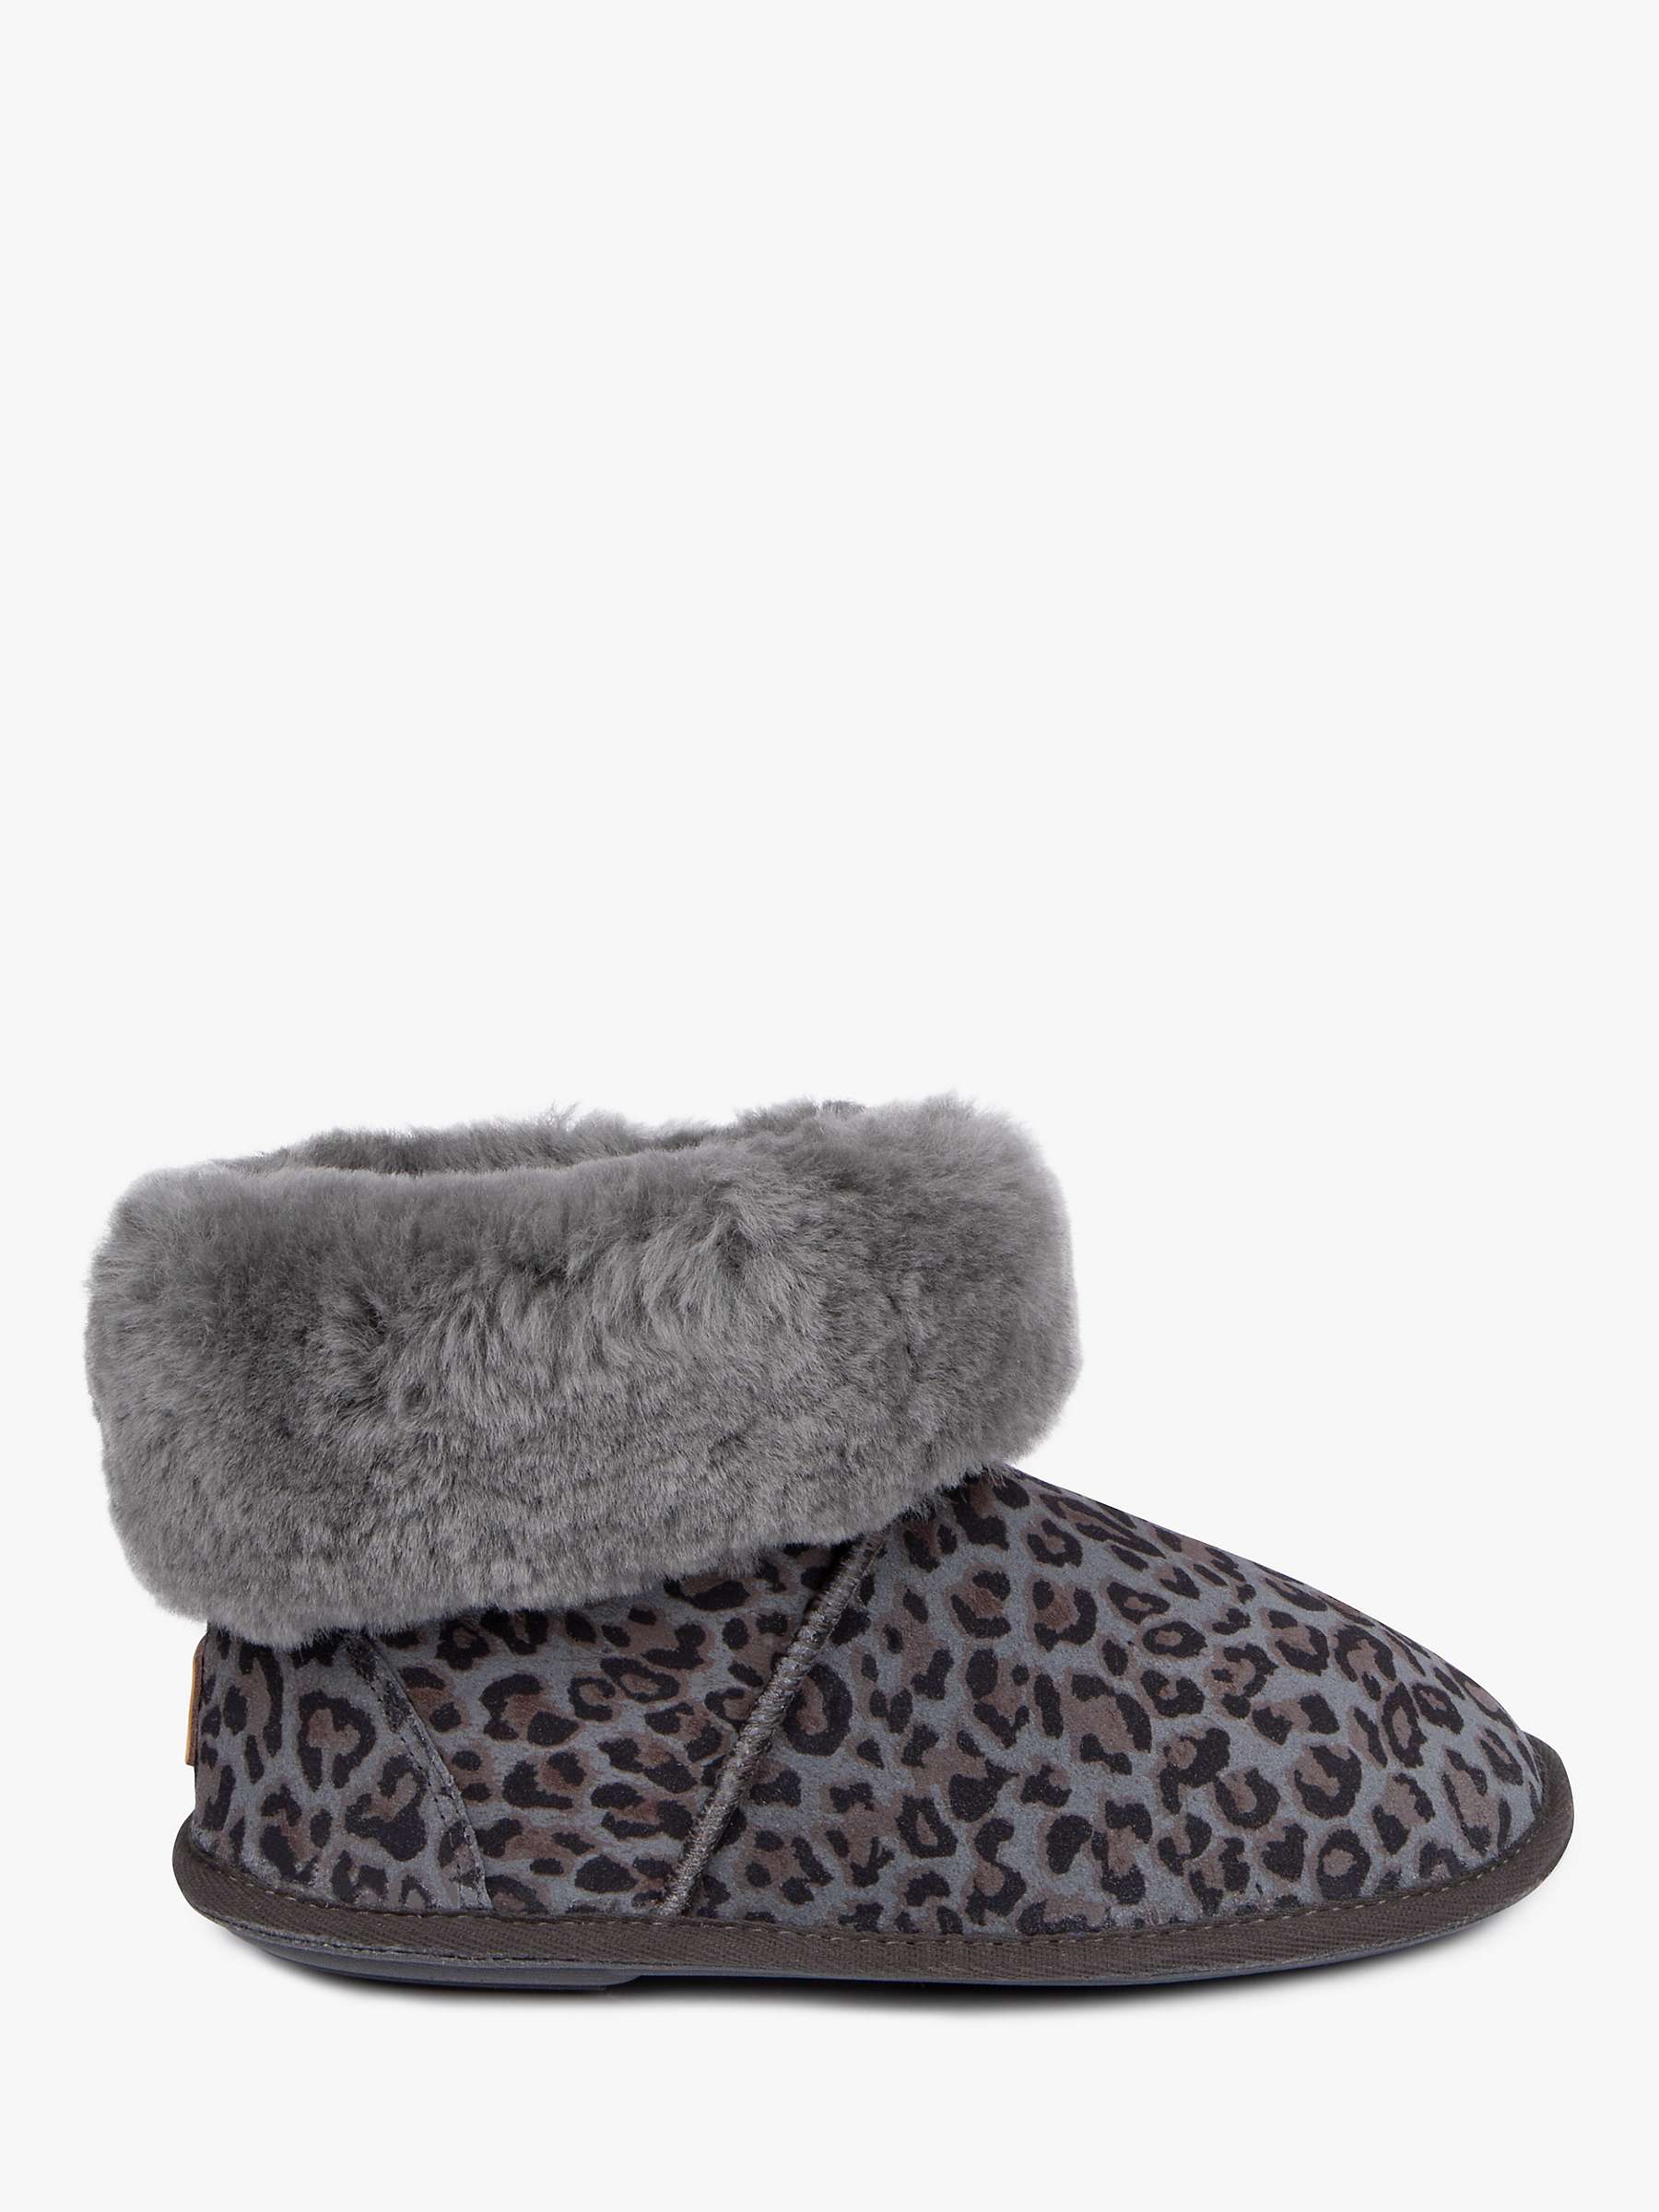 Just Sheepskin Albery Suede Slipper Boots, Grey Animal at John Lewis &  Partners